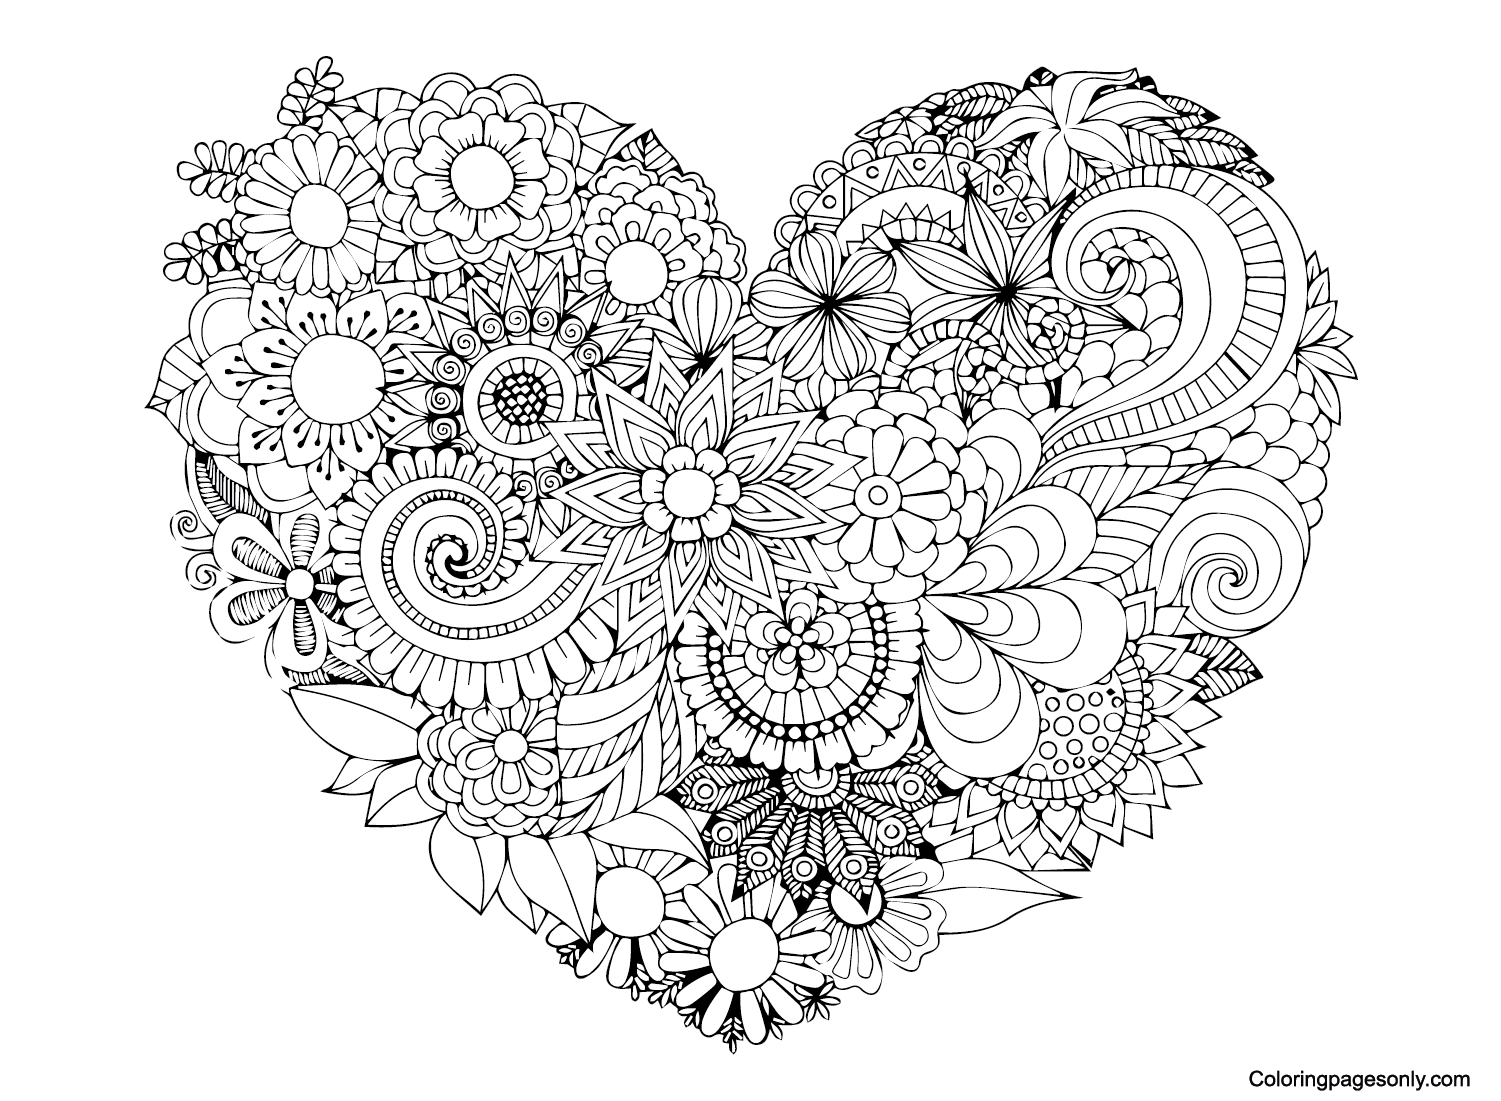 Mindfulness Images Coloring Page